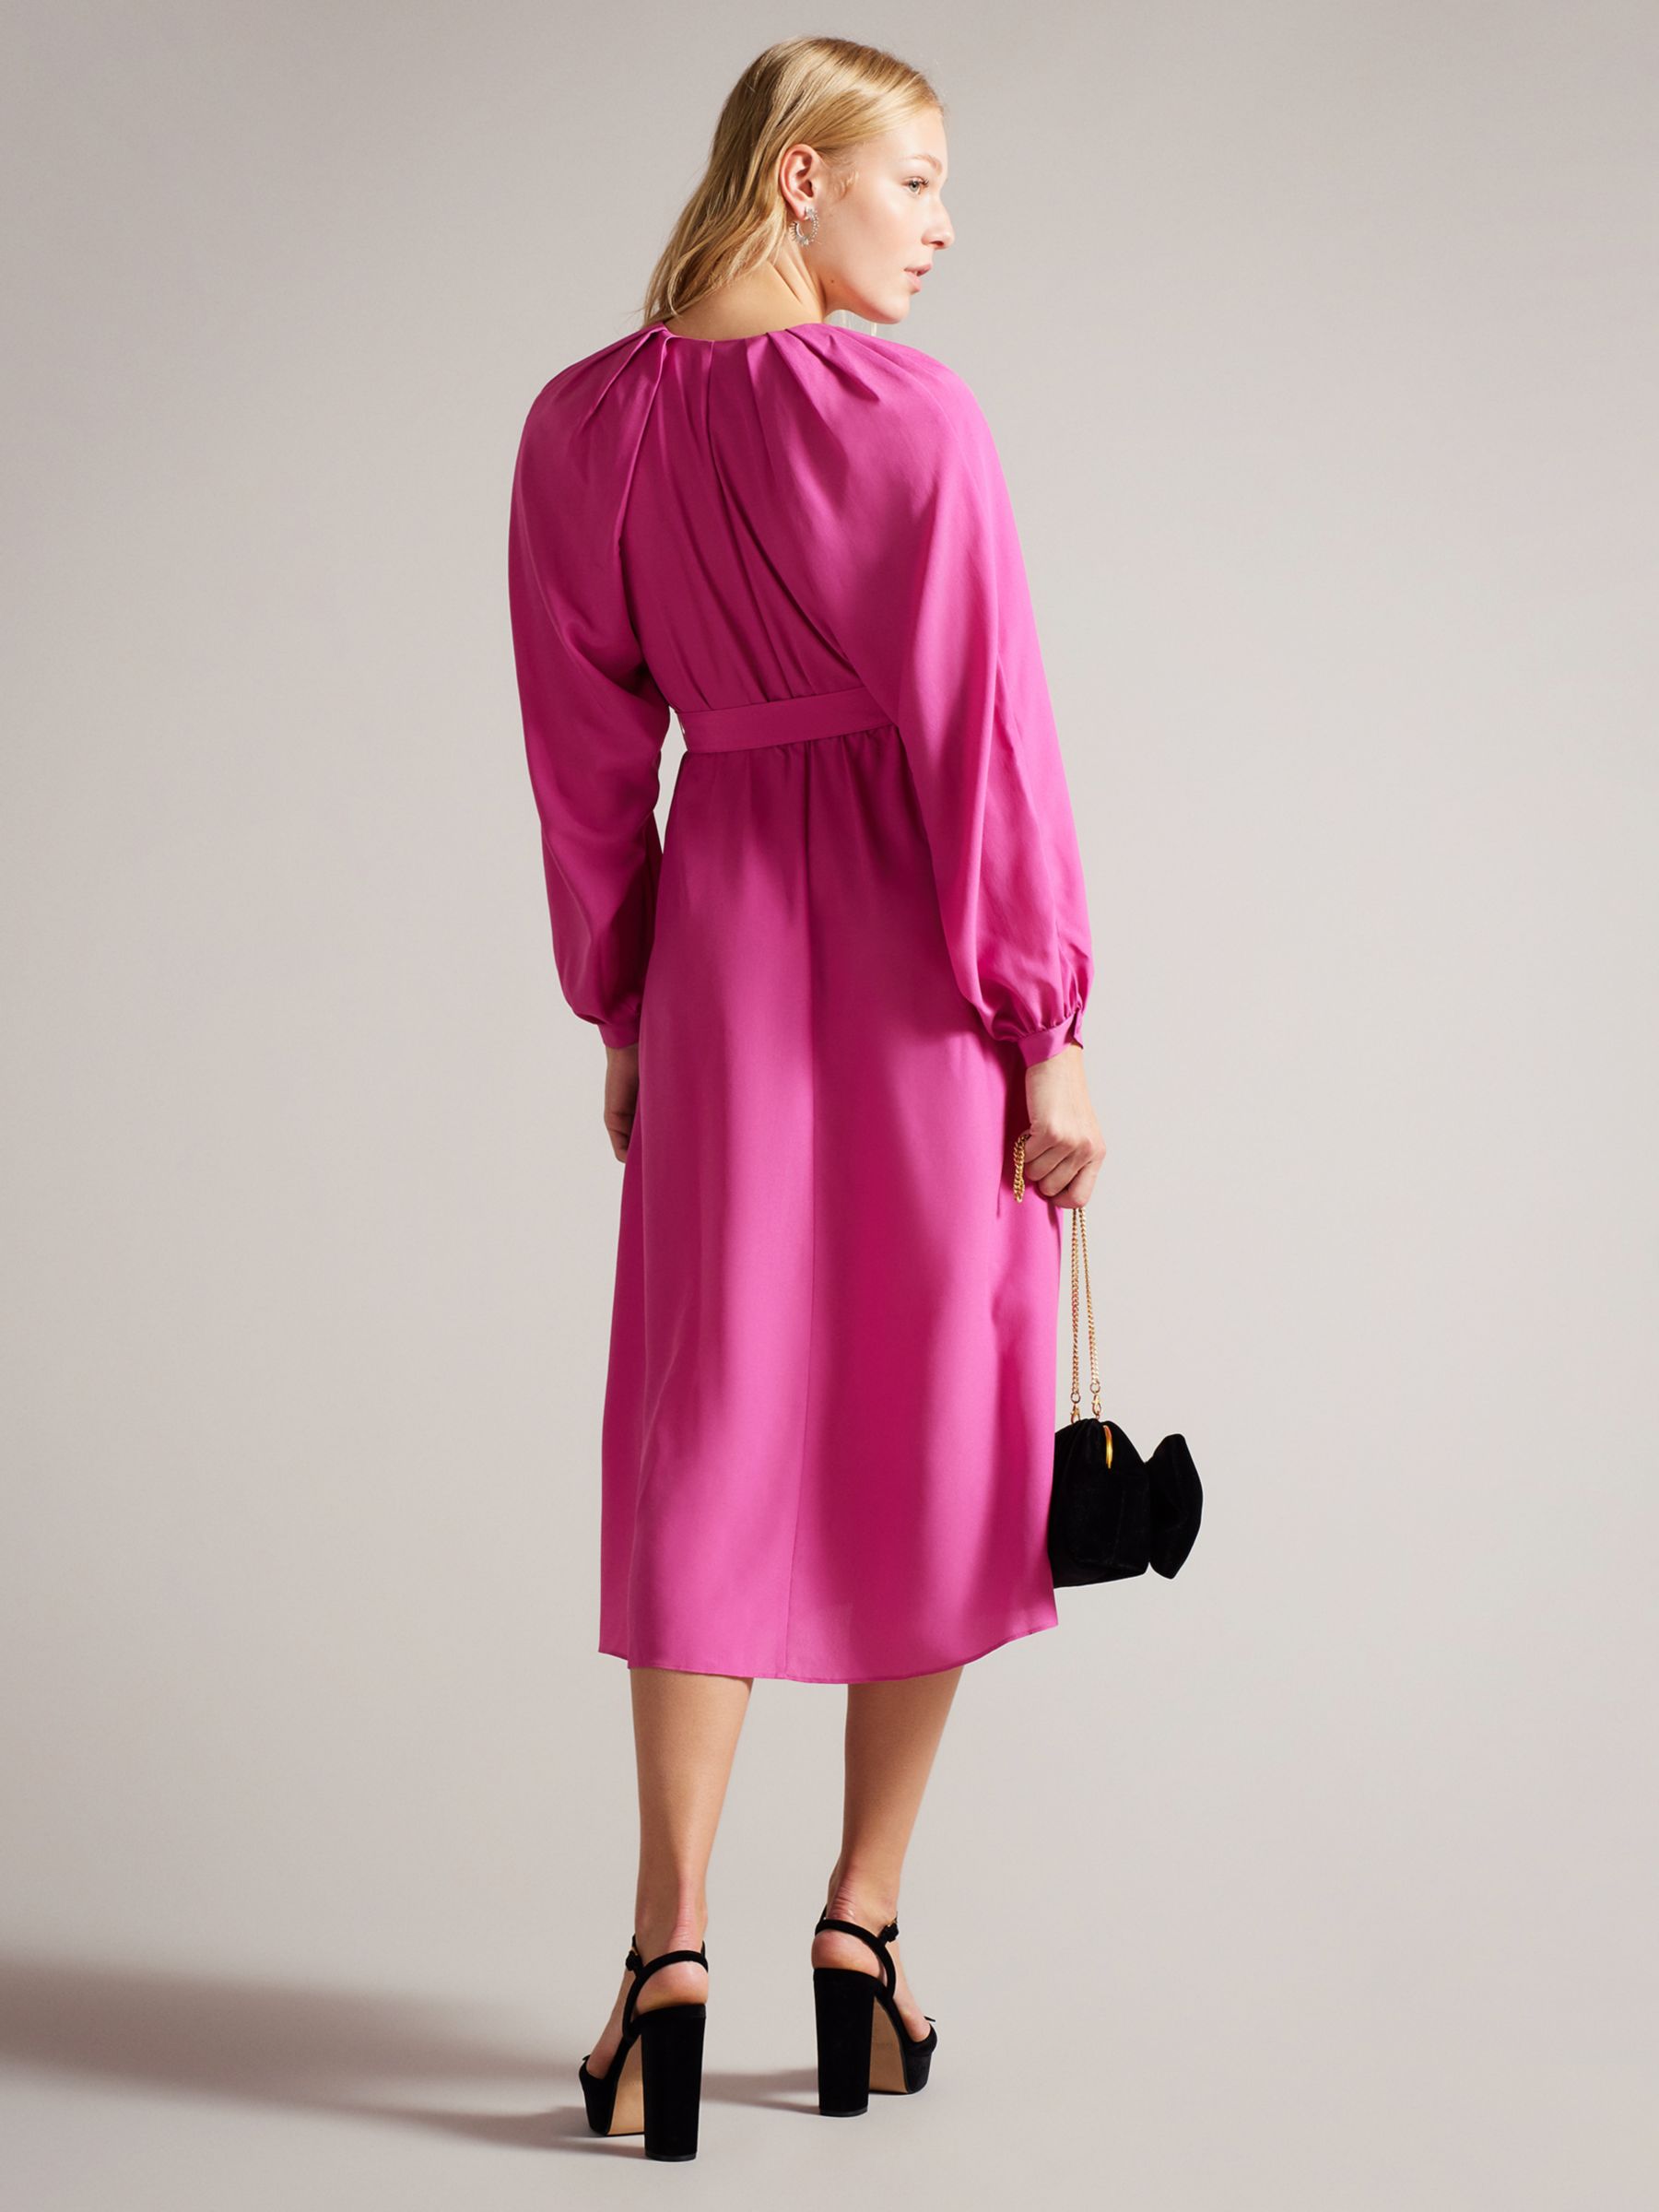 Ted Baker Comus Belted Midi Dress, Hot Pink at John Lewis & Partners